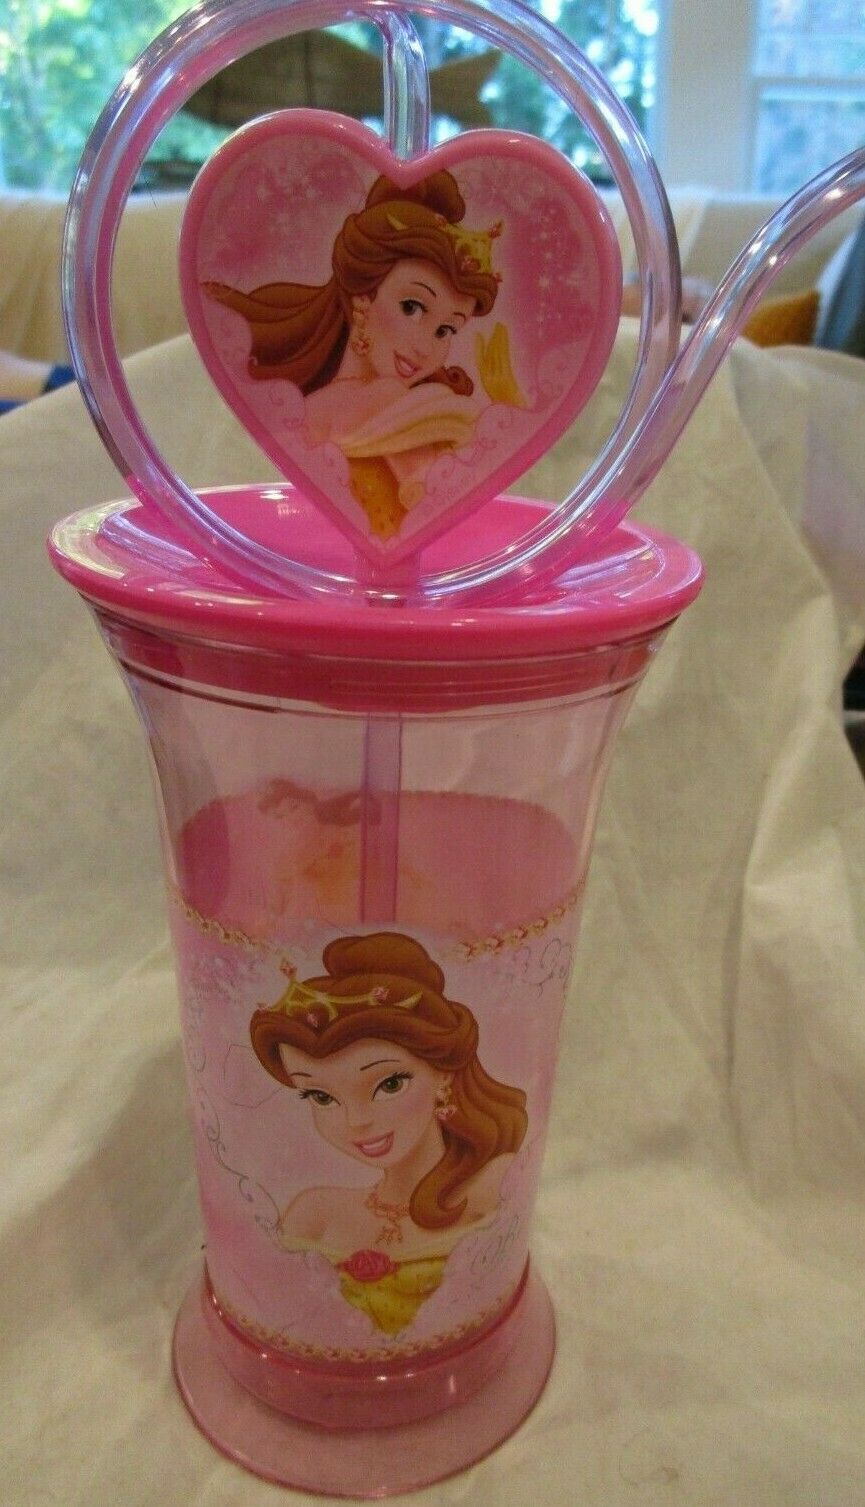 WDW DISNEY Princess Belle Tumbler with Straw and Spinning Heart Brand New - $29.99